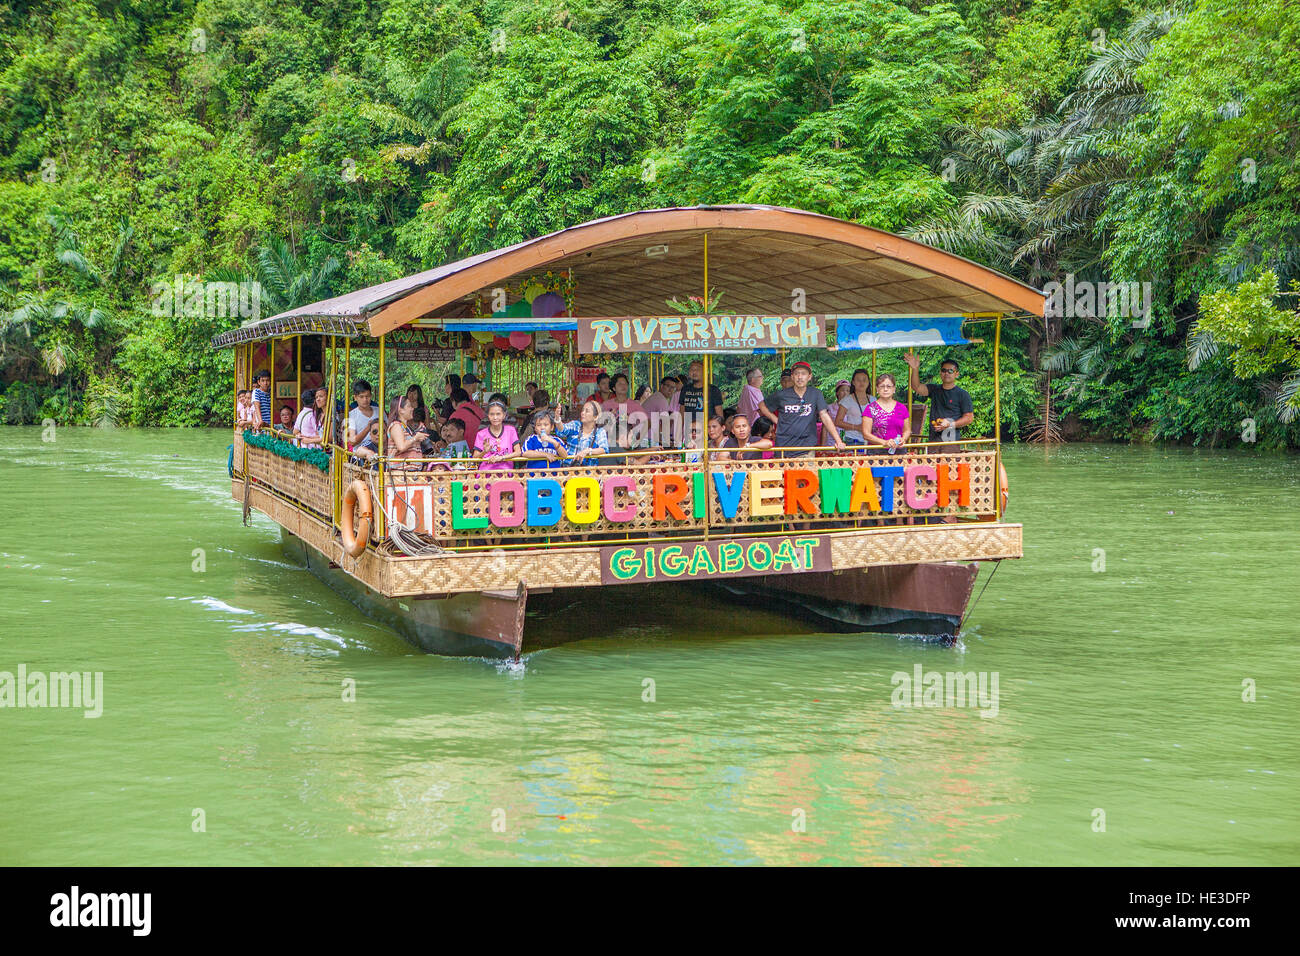 Vacationers enjoy a dinner and cruise on the Loboc River with Riverwatch Gigaboat tours on Bohol Island, Philippines. Stock Photo